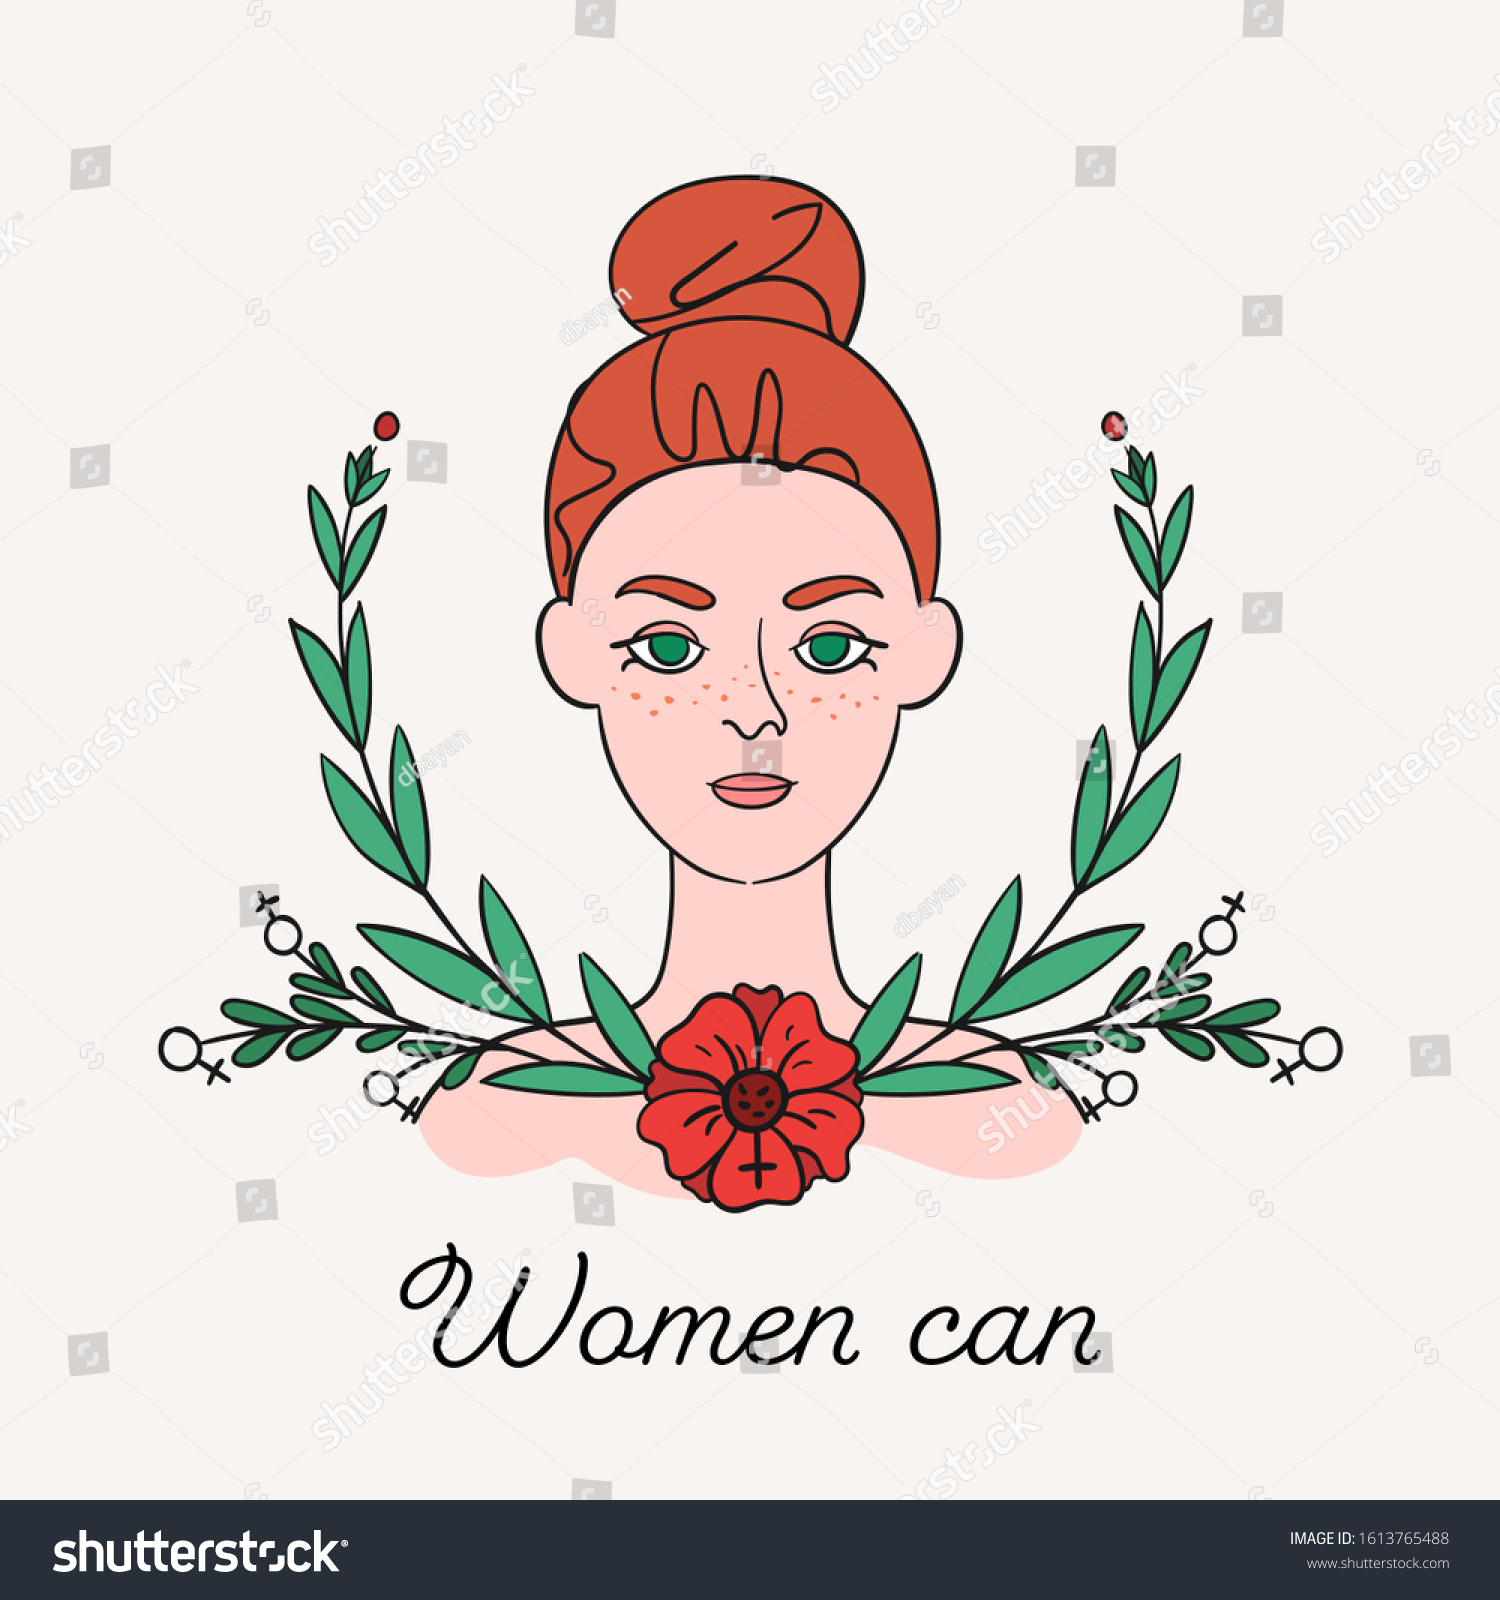 Women Can Hand Drawn Illustration Red Stock Vector Royalty Free 1613765488 Shutterstock 